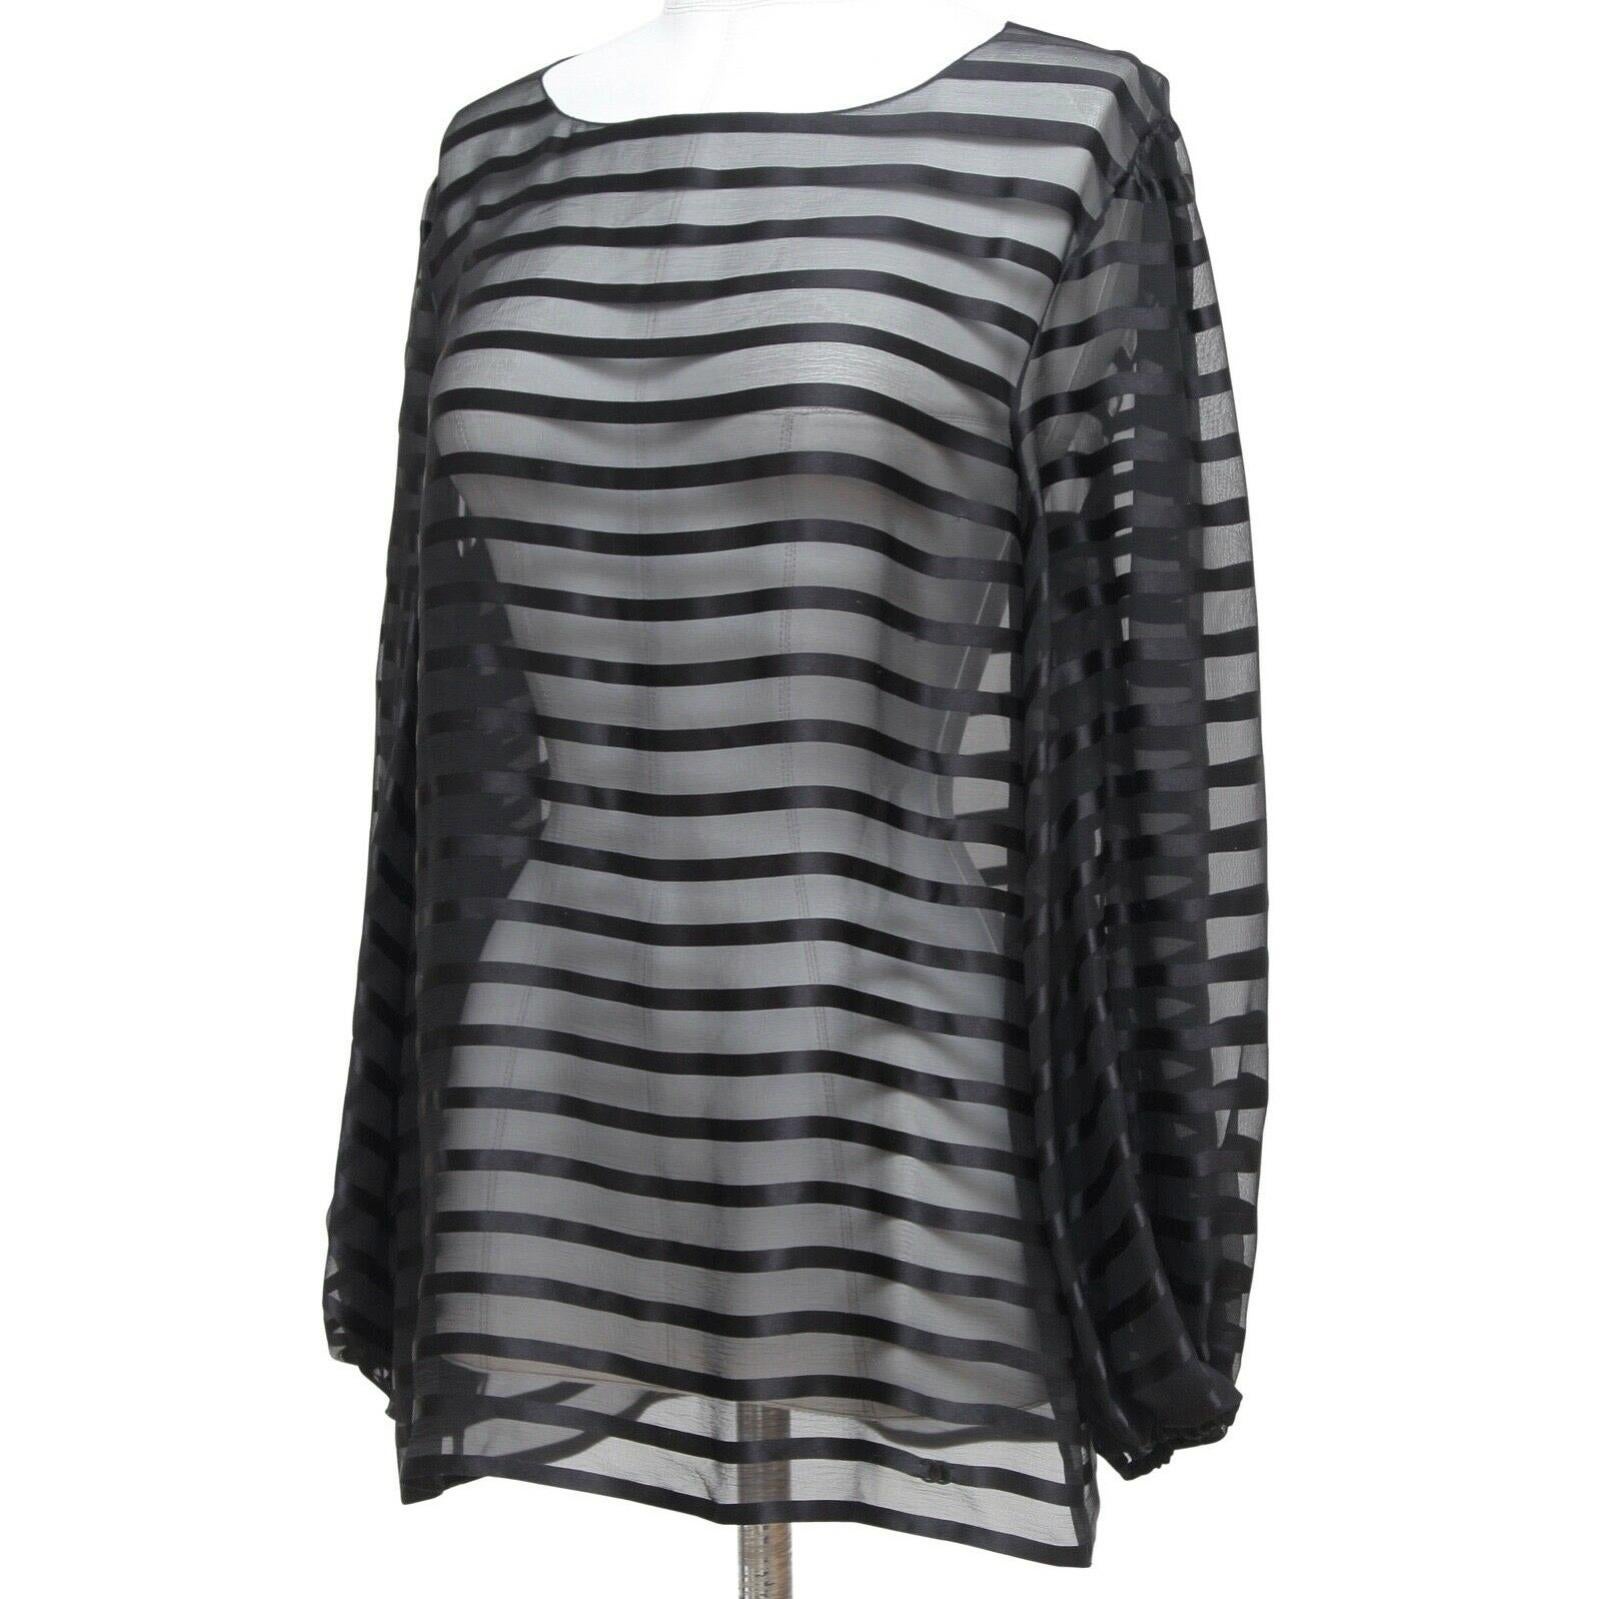 chanel striped top